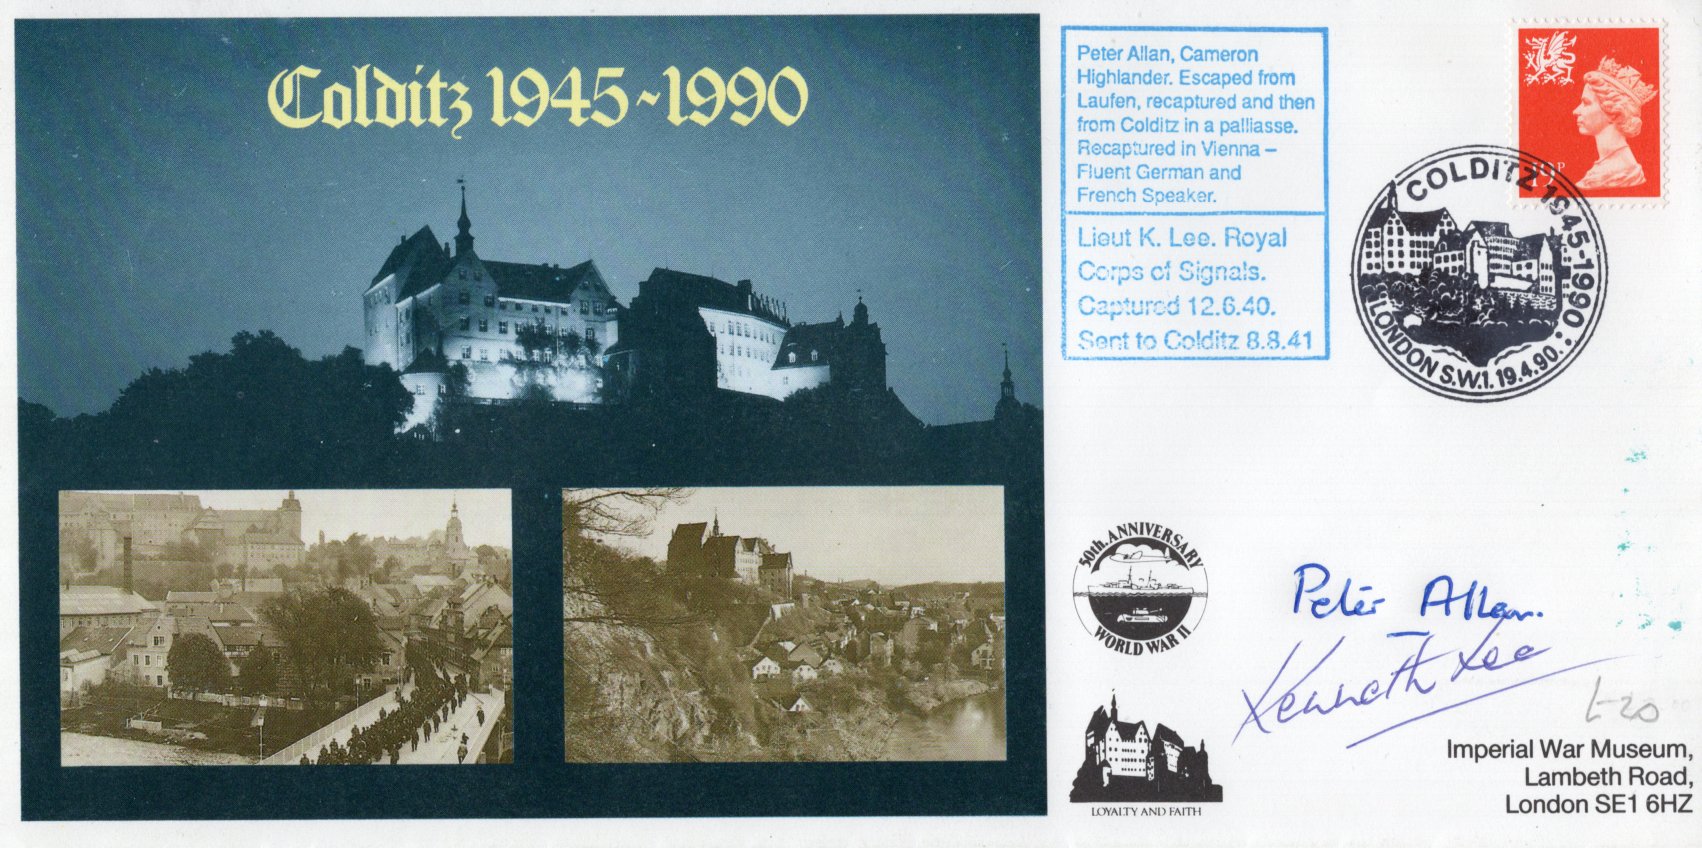 Colditz Castle WWII Prisoner of War camp cover signed by TWO former inmates in Peter Allan and Lt